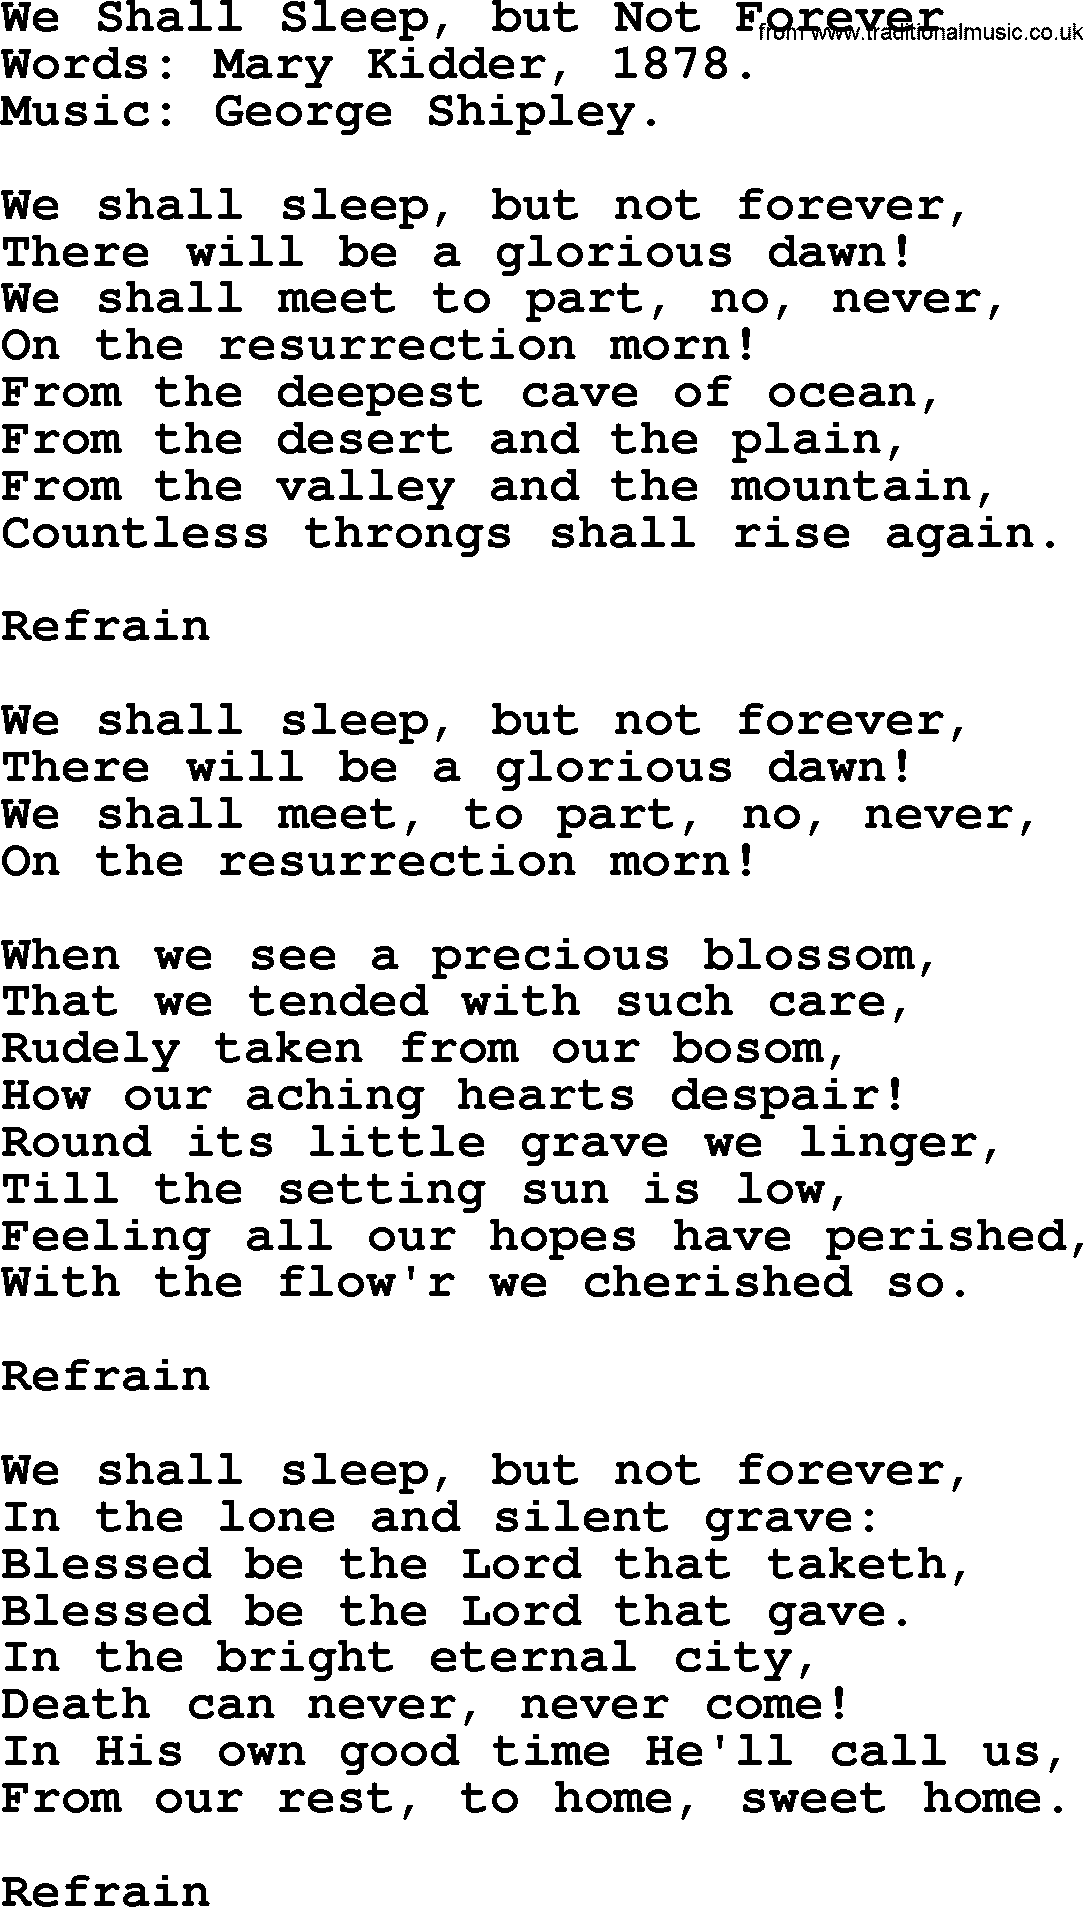 100+ Christian Funeral Hymns collection, Hymn: We Shall Sleep, but Not Forever, lyrics and PDF